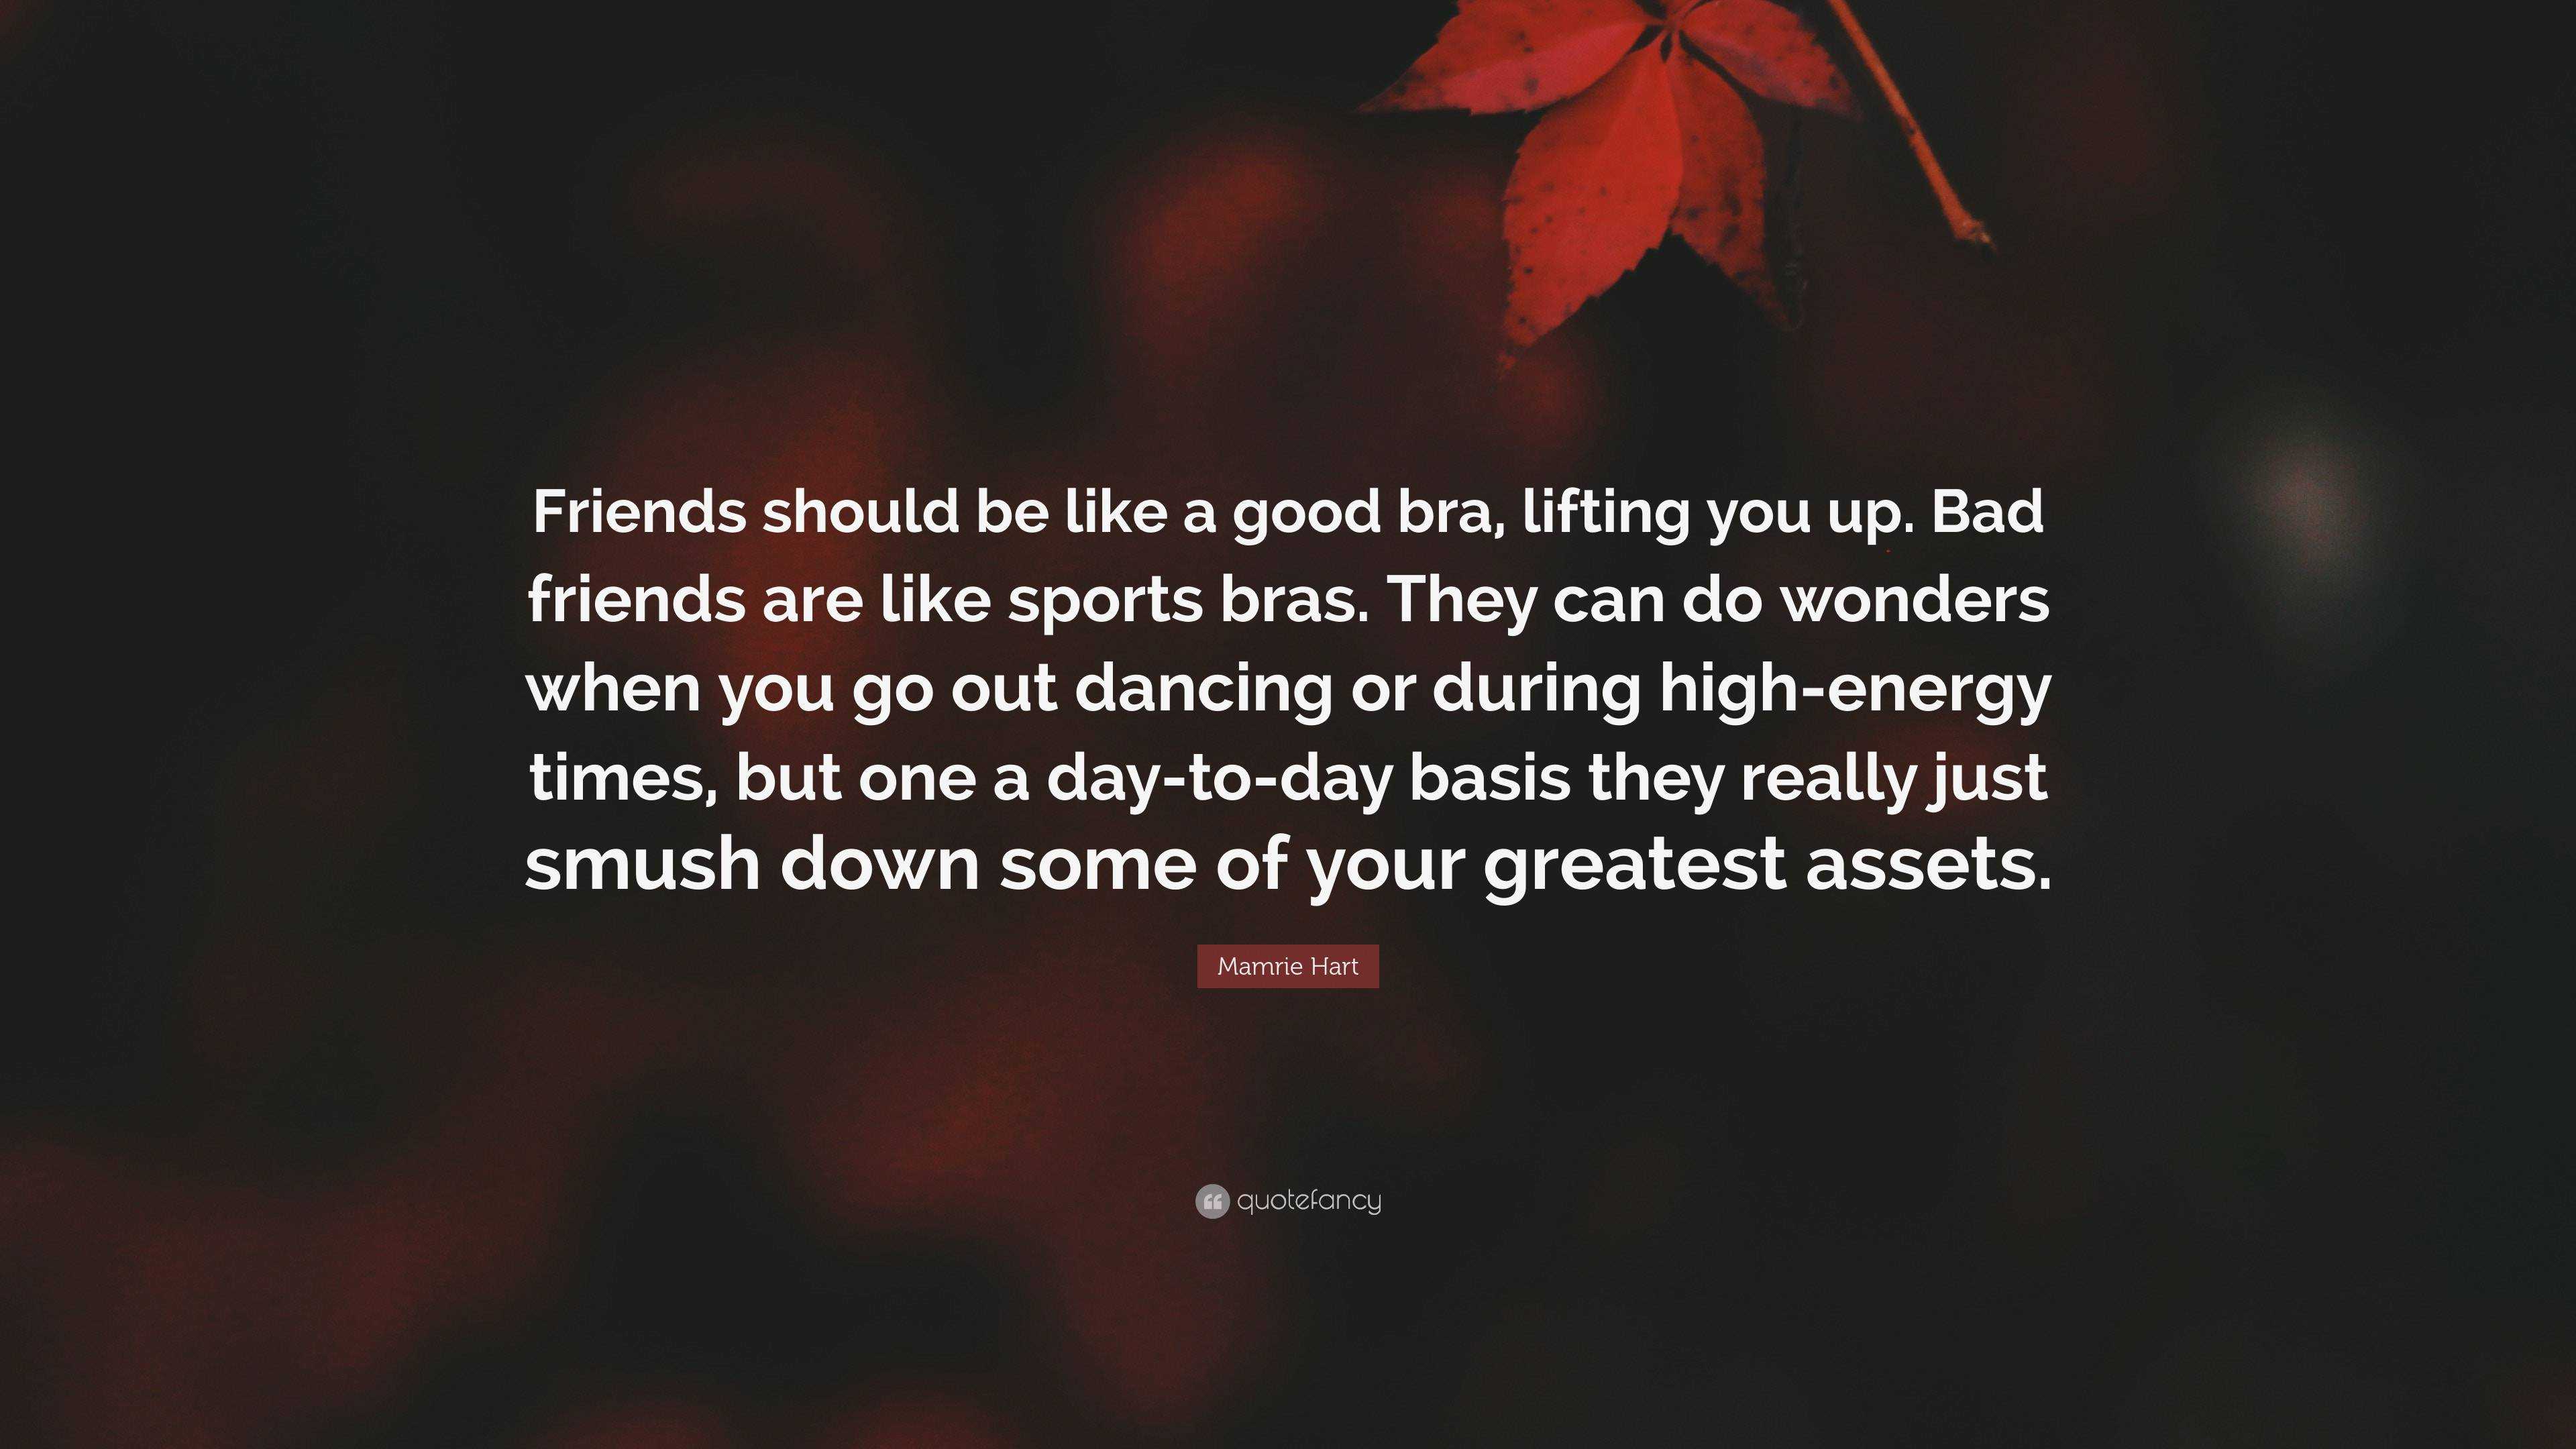 https://quotefancy.com/media/wallpaper/3840x2160/6457362-Mamrie-Hart-Quote-Friends-should-be-like-a-good-bra-lifting-you-up.jpg